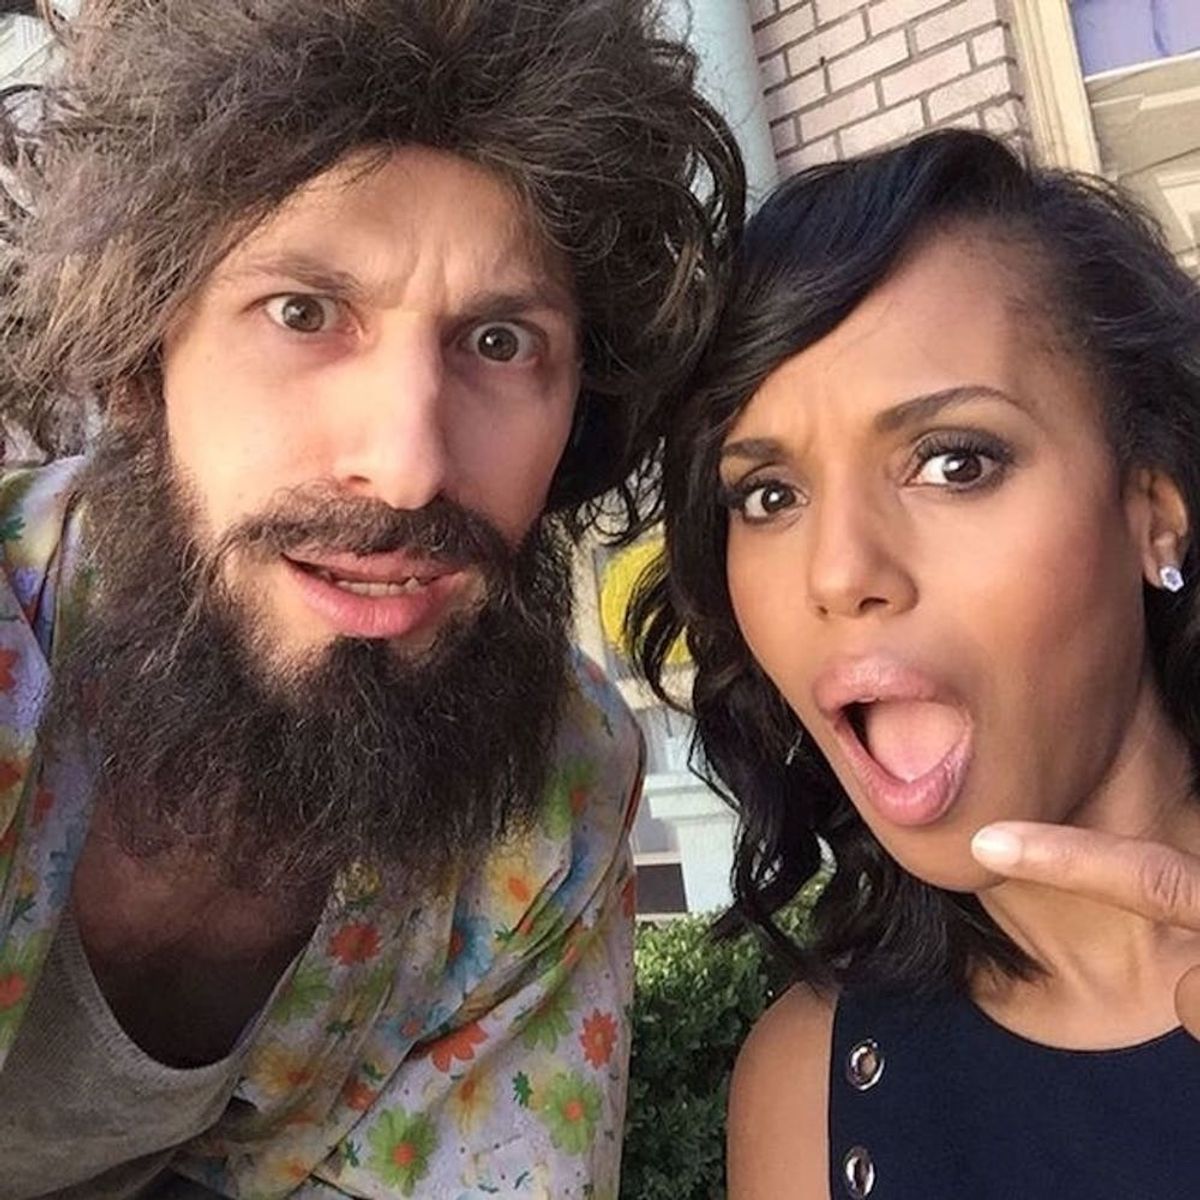 11 Celebrity Instagrams That Summed Up the Emmys